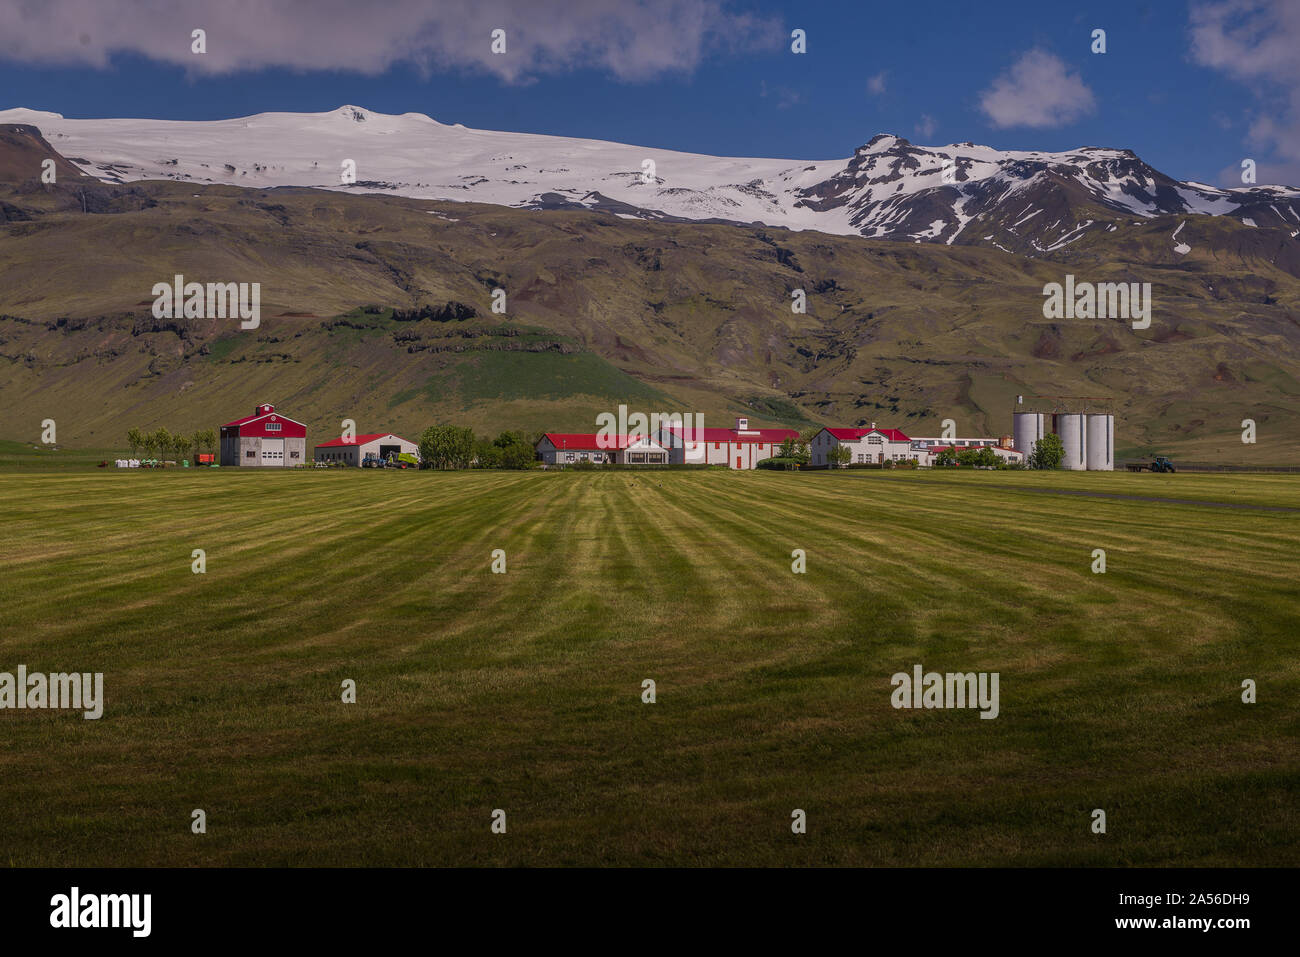 Landscape with distant row of houses and ice cap, Eyjafjallajökull, Iceland Stock Photo